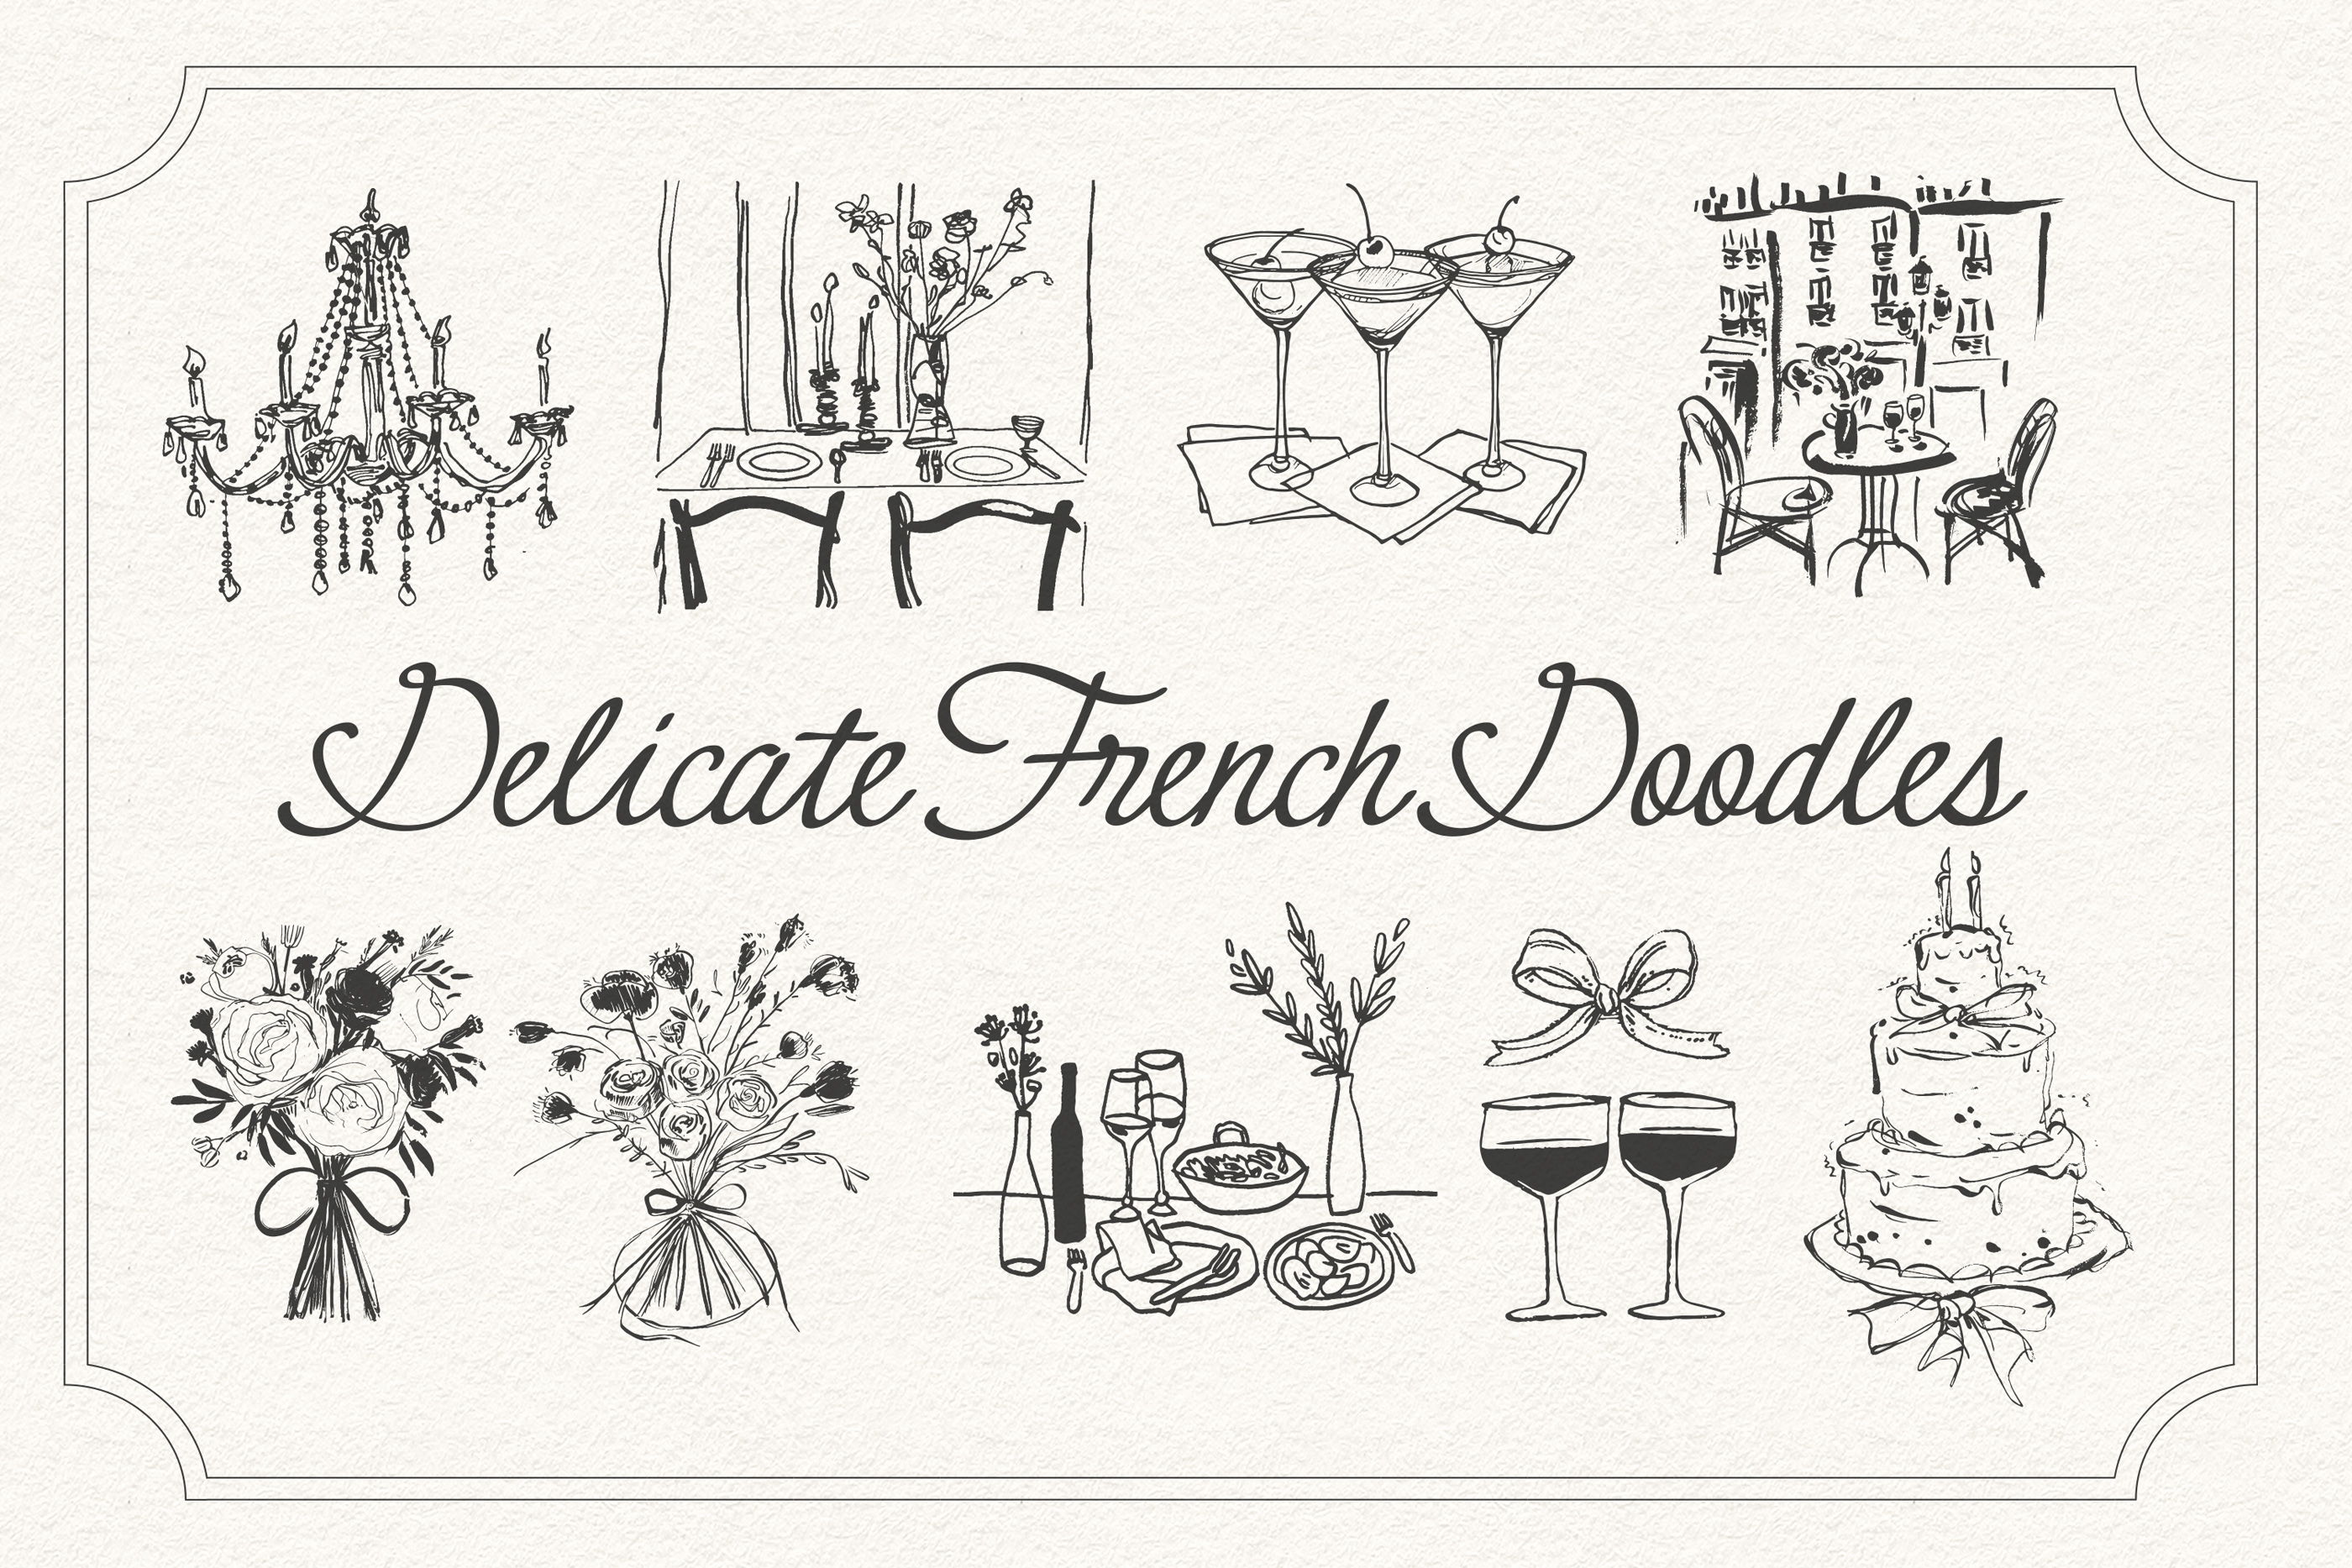 Delicate French Doodles (Illustrations) by Nicky Laatz